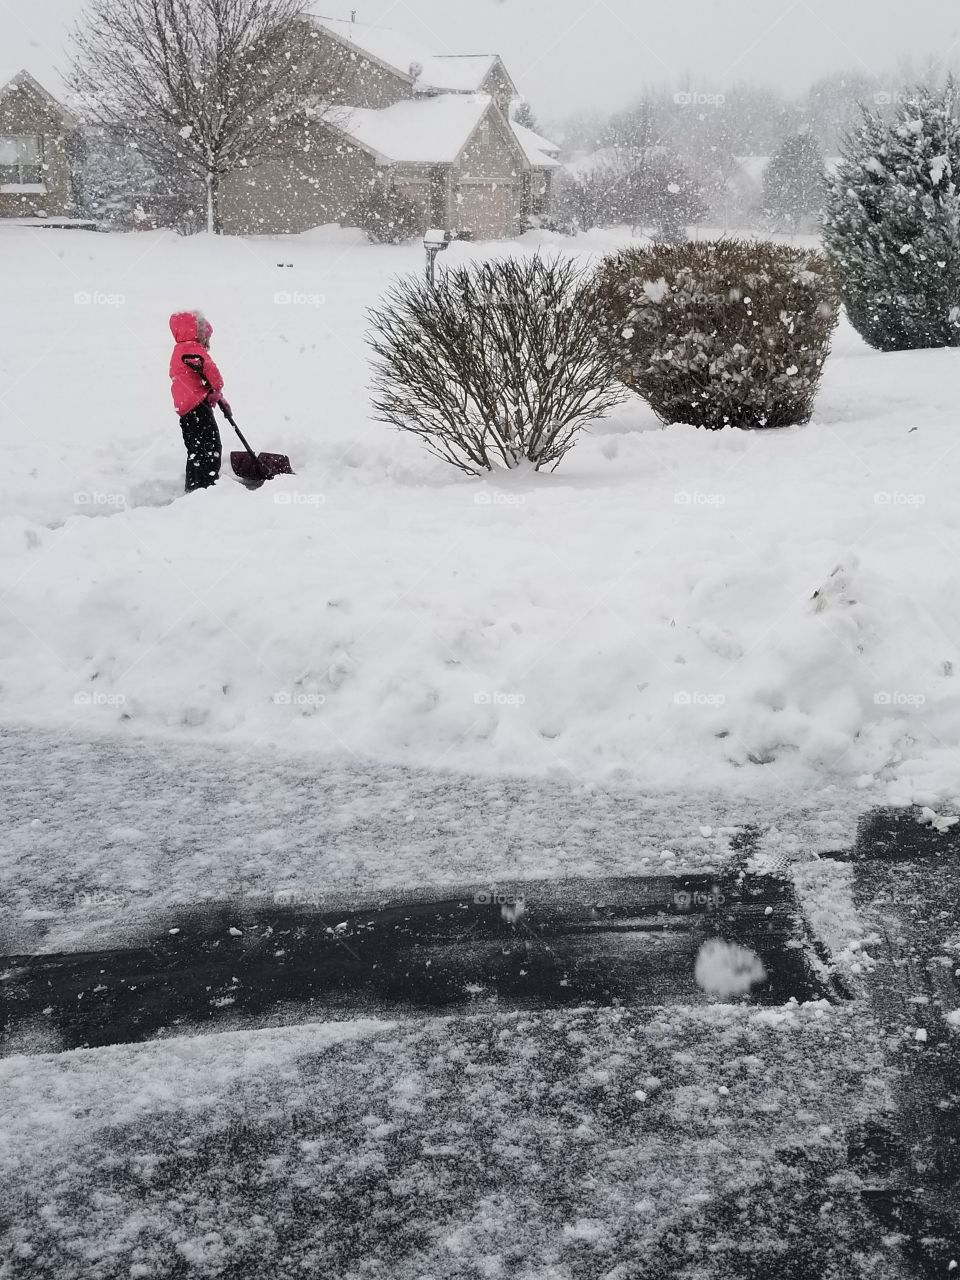 small child shoveling snow during winter storm Bruce